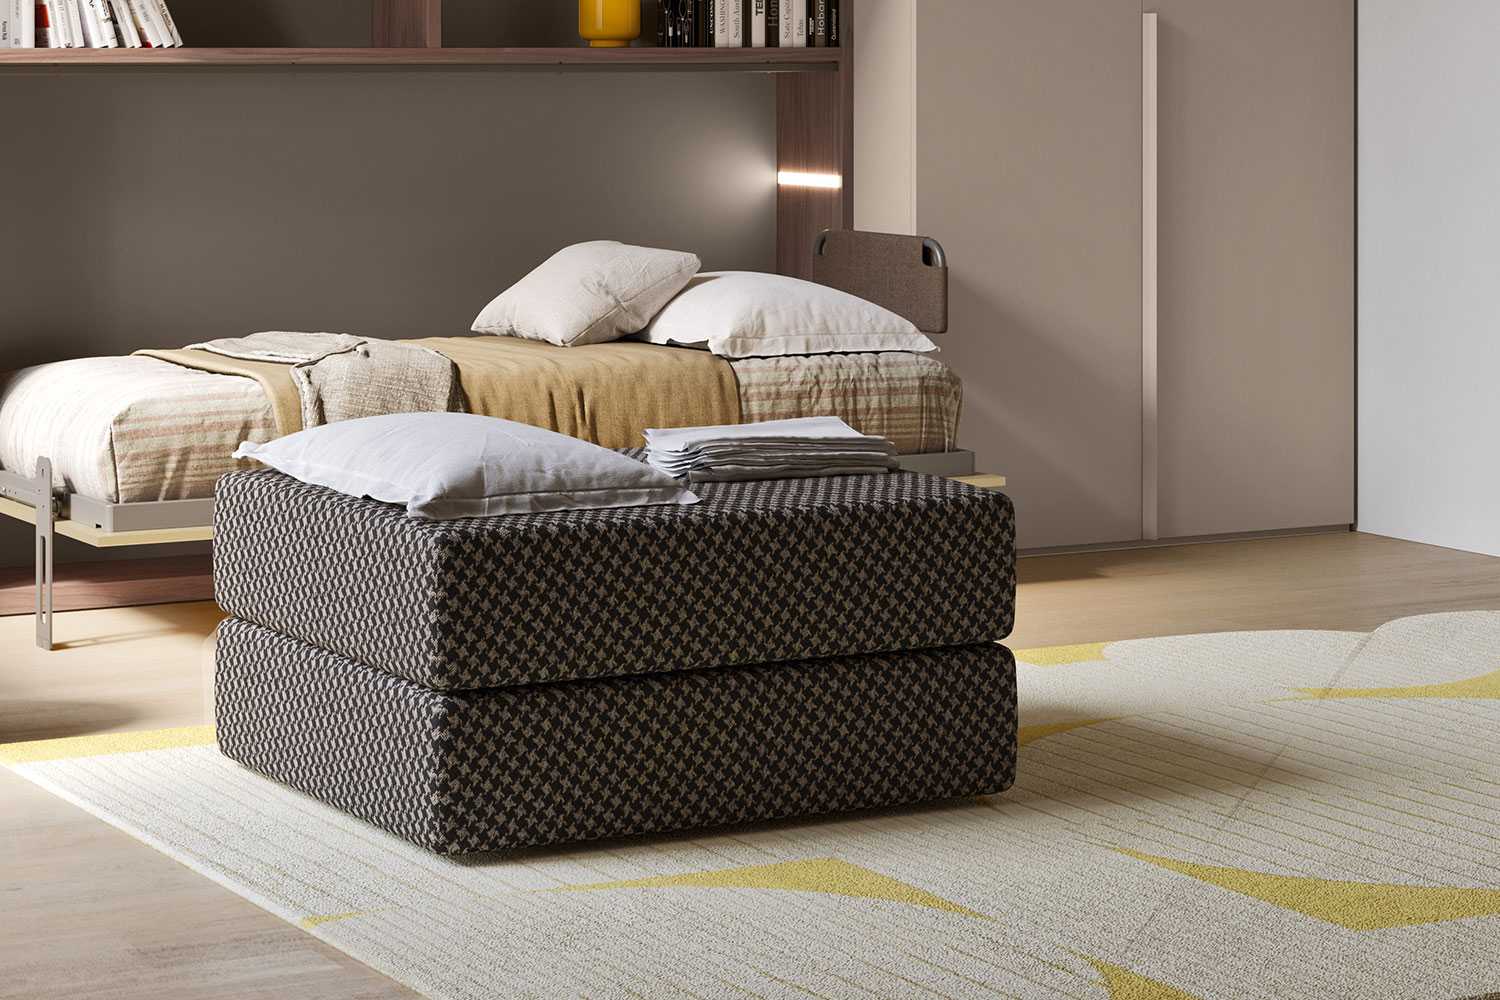 Foldable single bed pouff InMotion